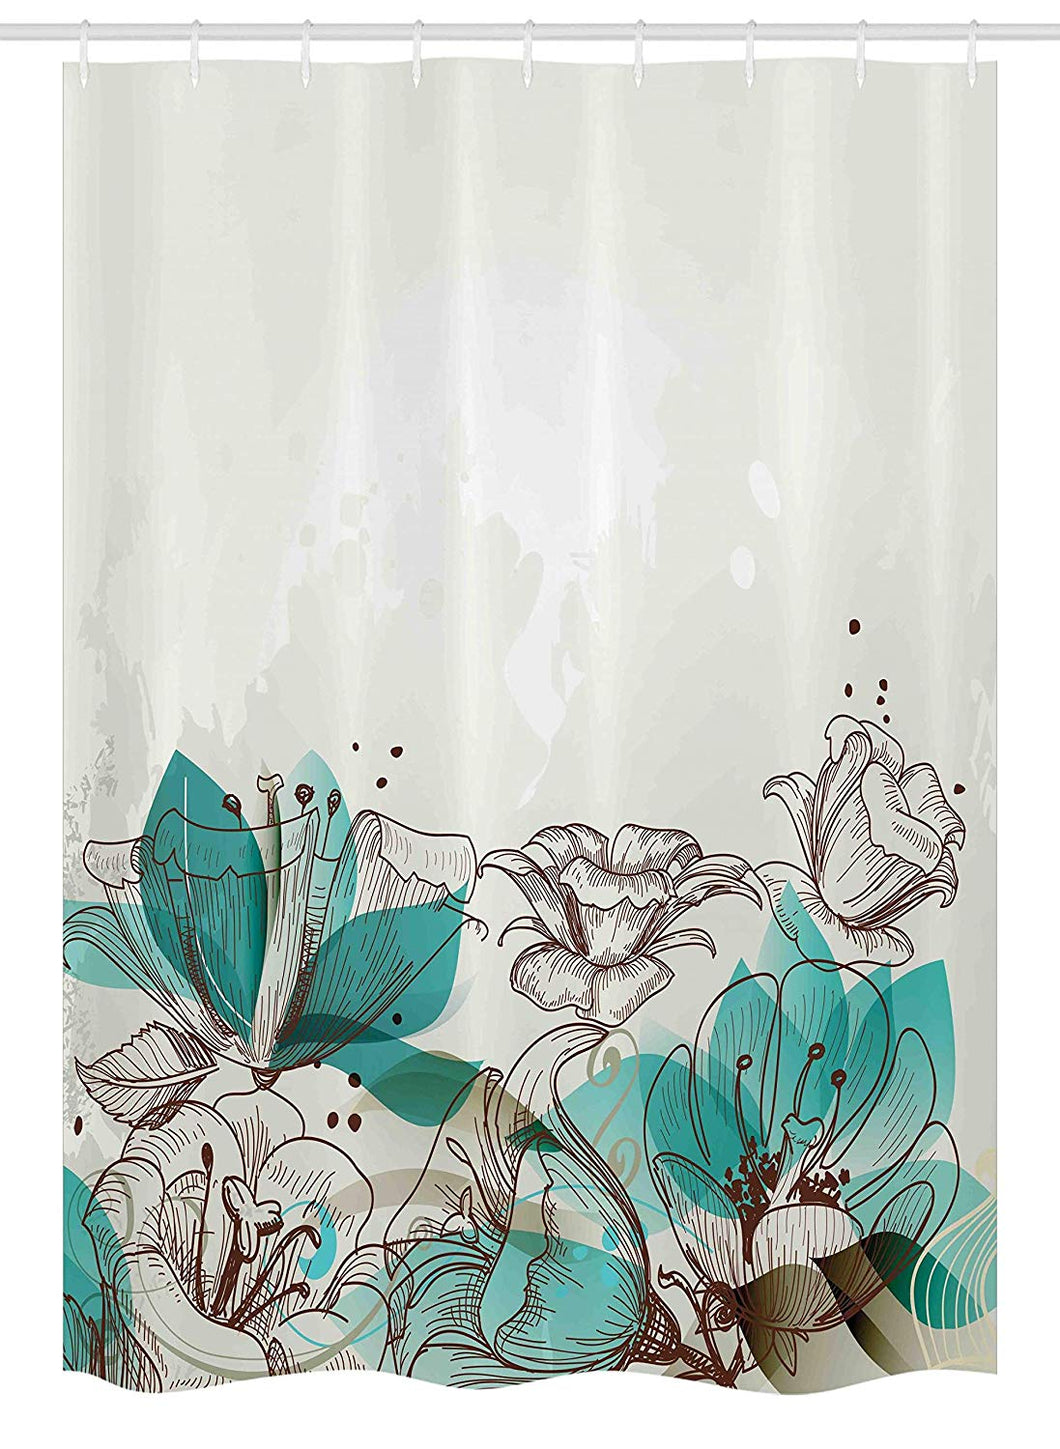 Ambesonne Turquoise Stall Shower Curtain, Retro Floral Background with Hibiscus Silhouettes Dramatic Romantic Nature Art, Fabric Bathroom Decor Set with Hooks, 54